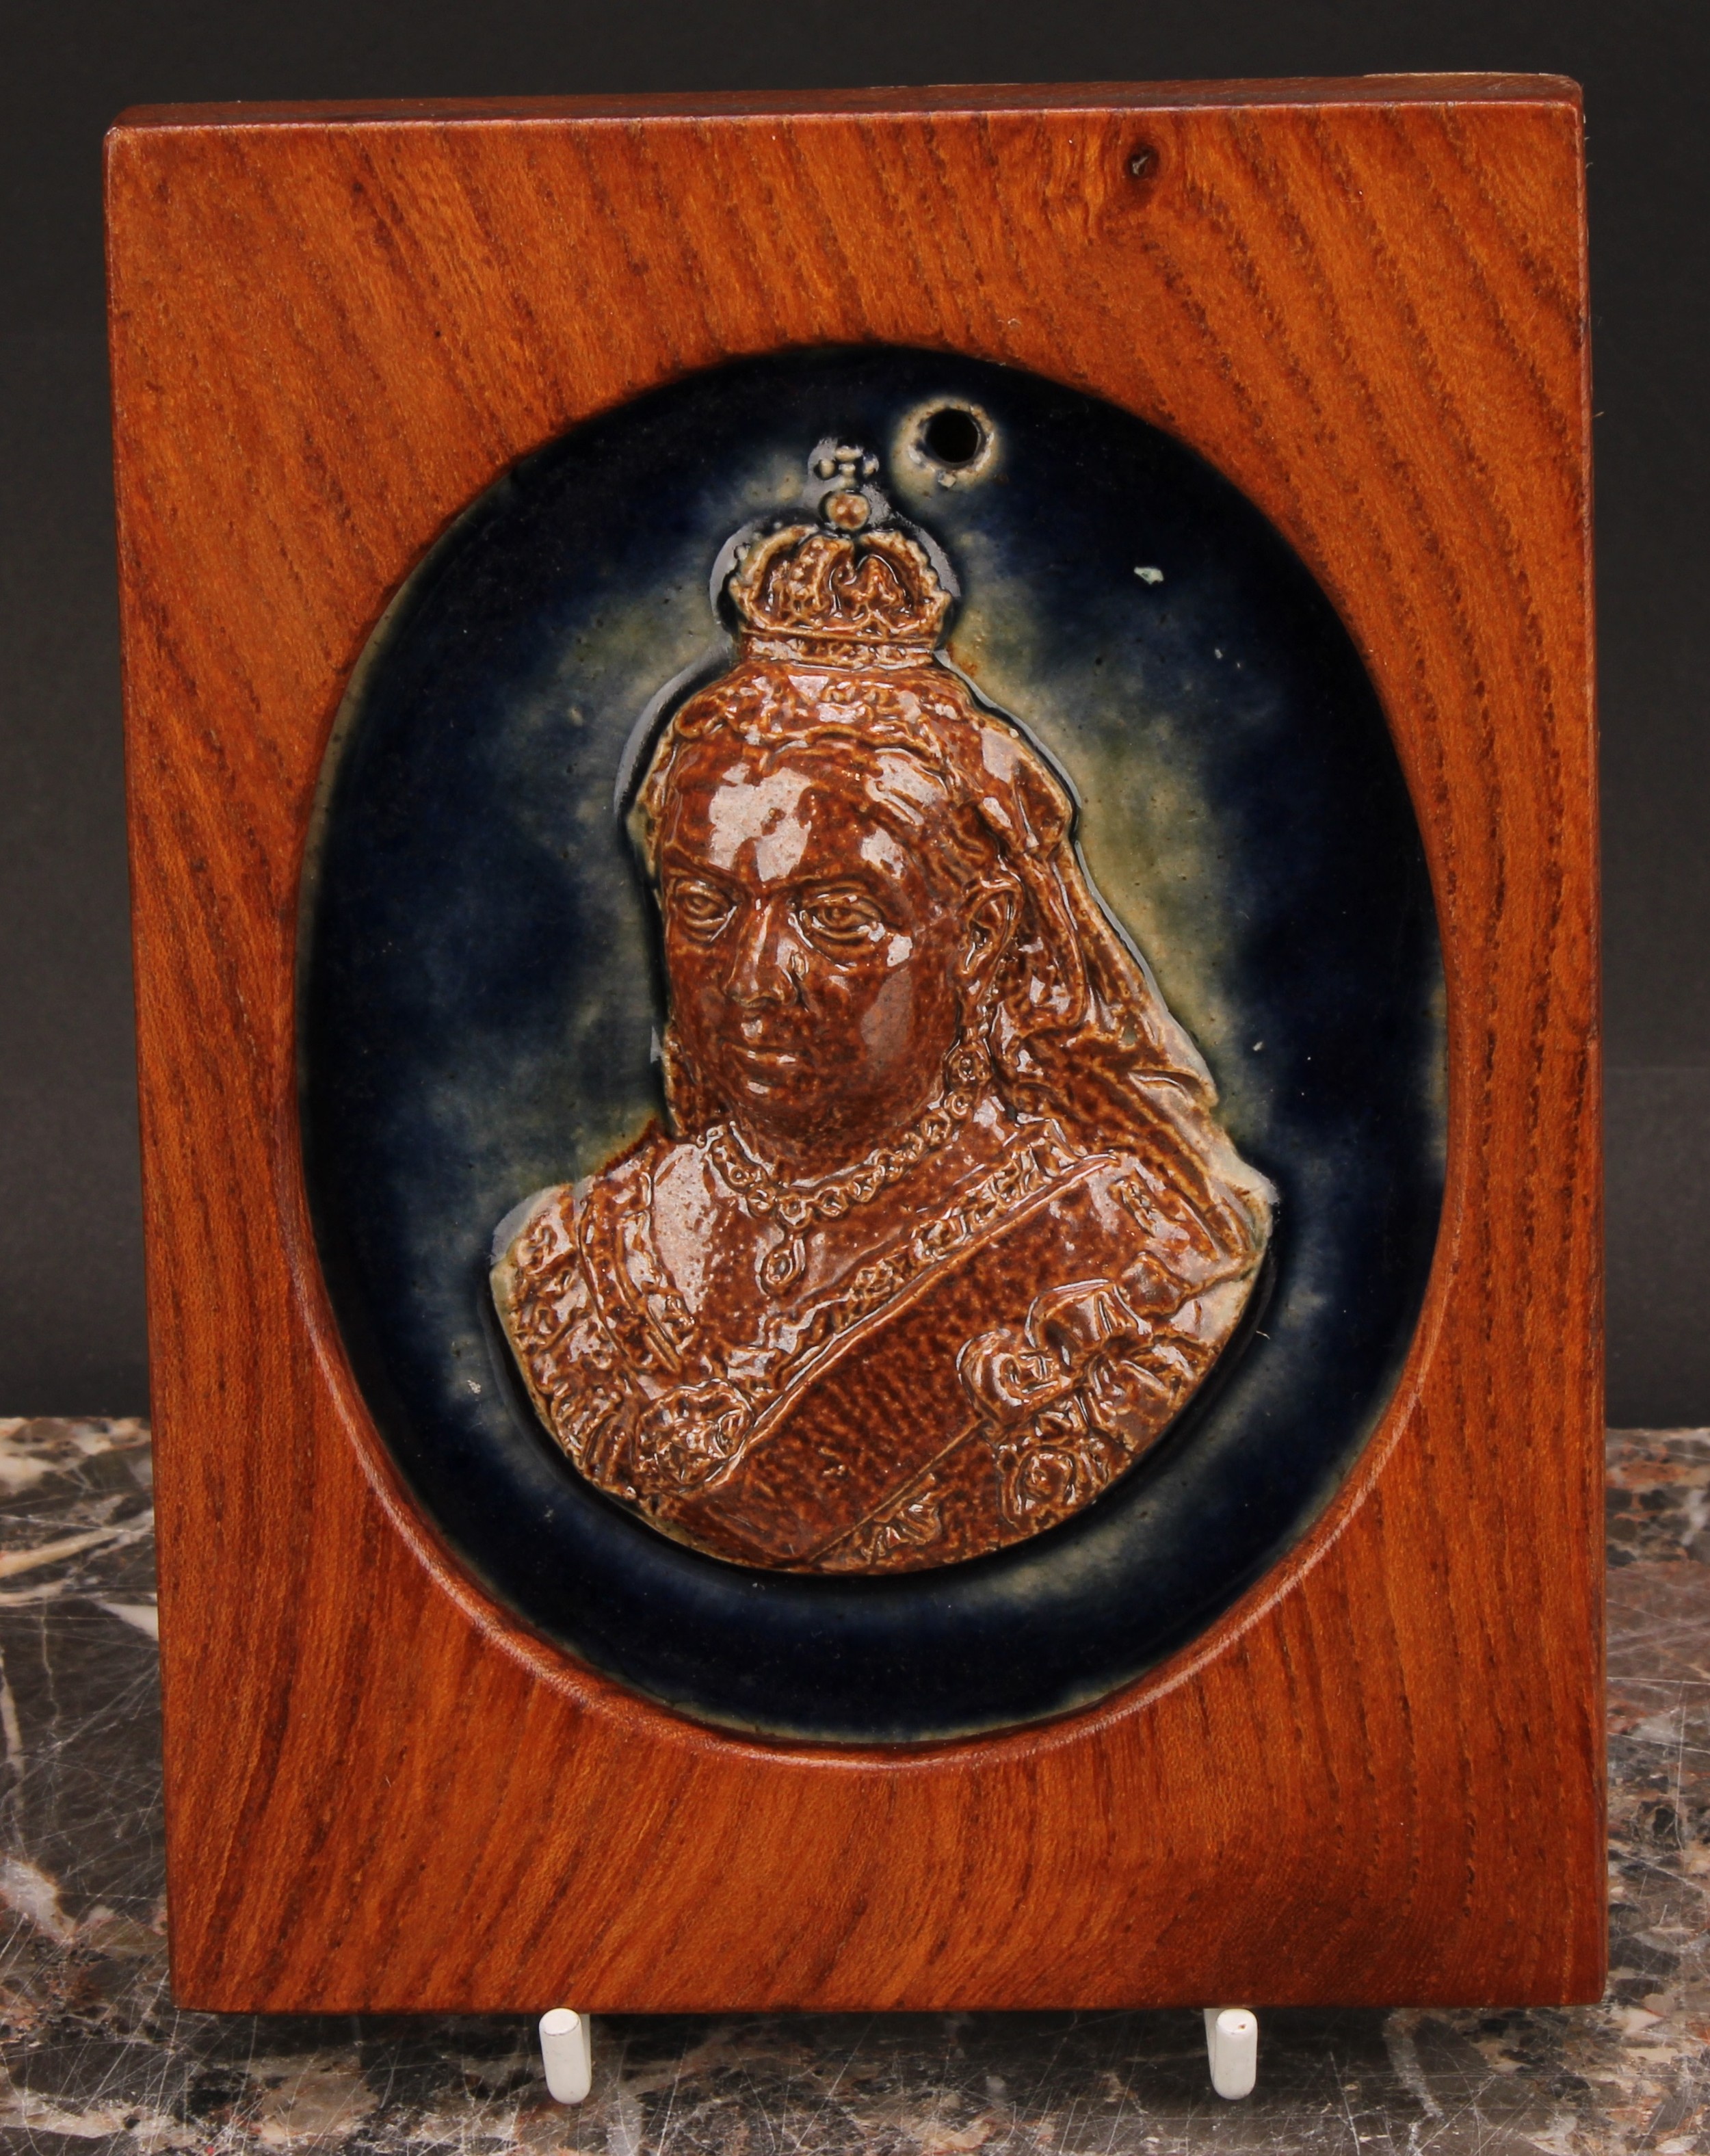 A Doulton Lambeth salt-glaze stoneware plaque, Queen Victoria, probably by John Broad, oval, 12cm - Image 2 of 3